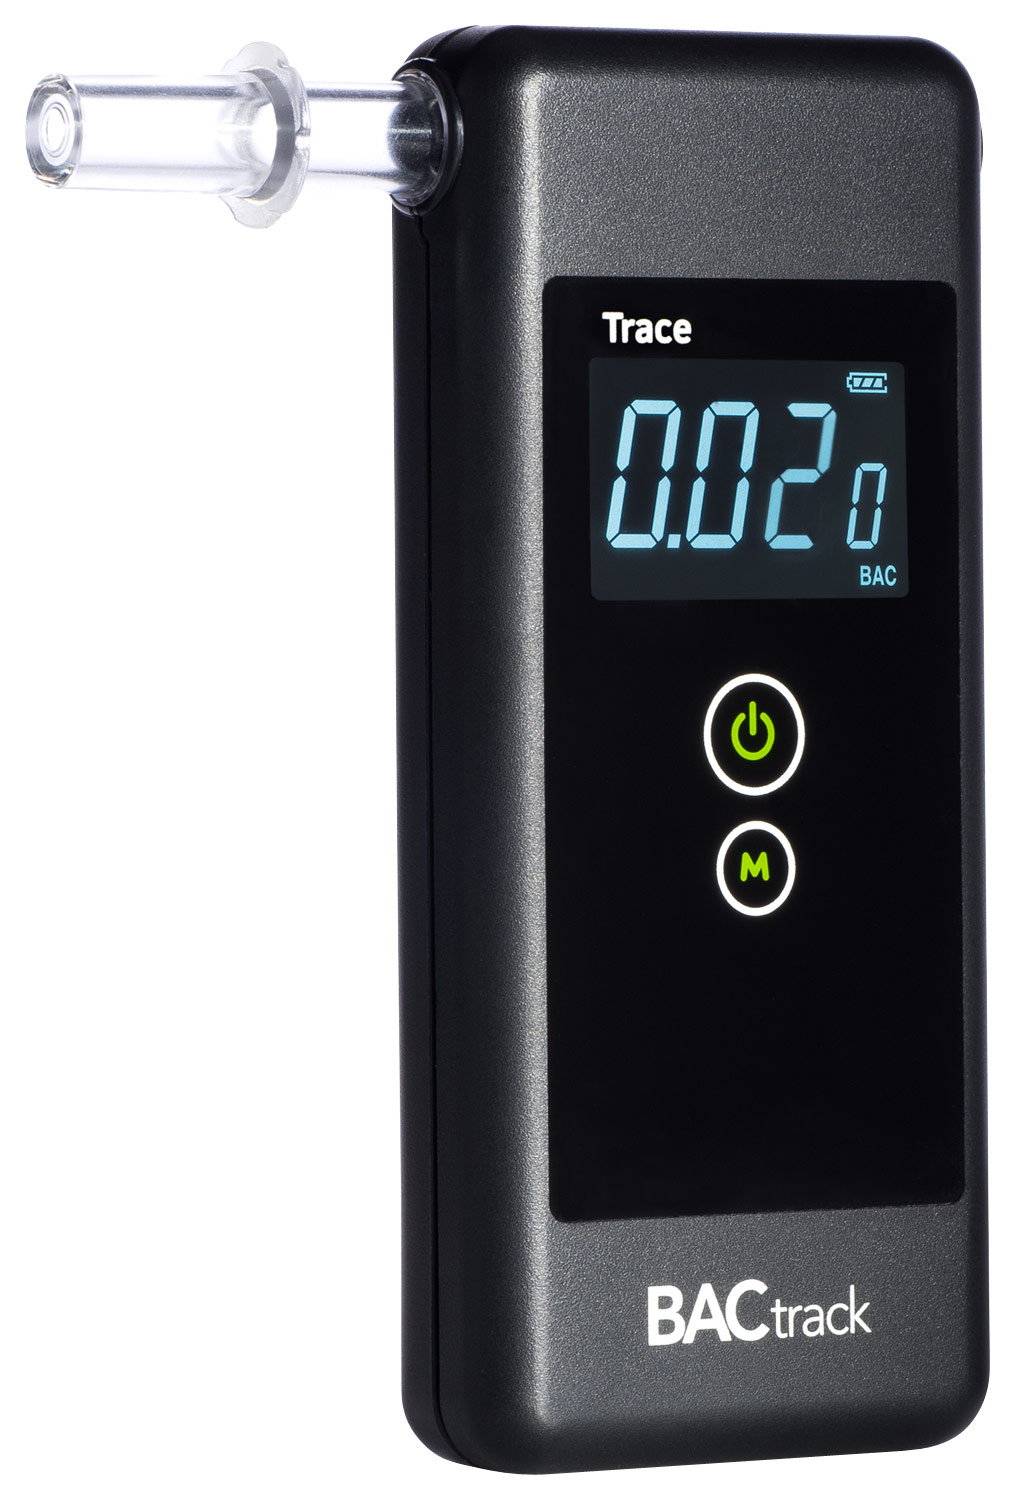 BACTRACK Trace Professional Breathalyzer